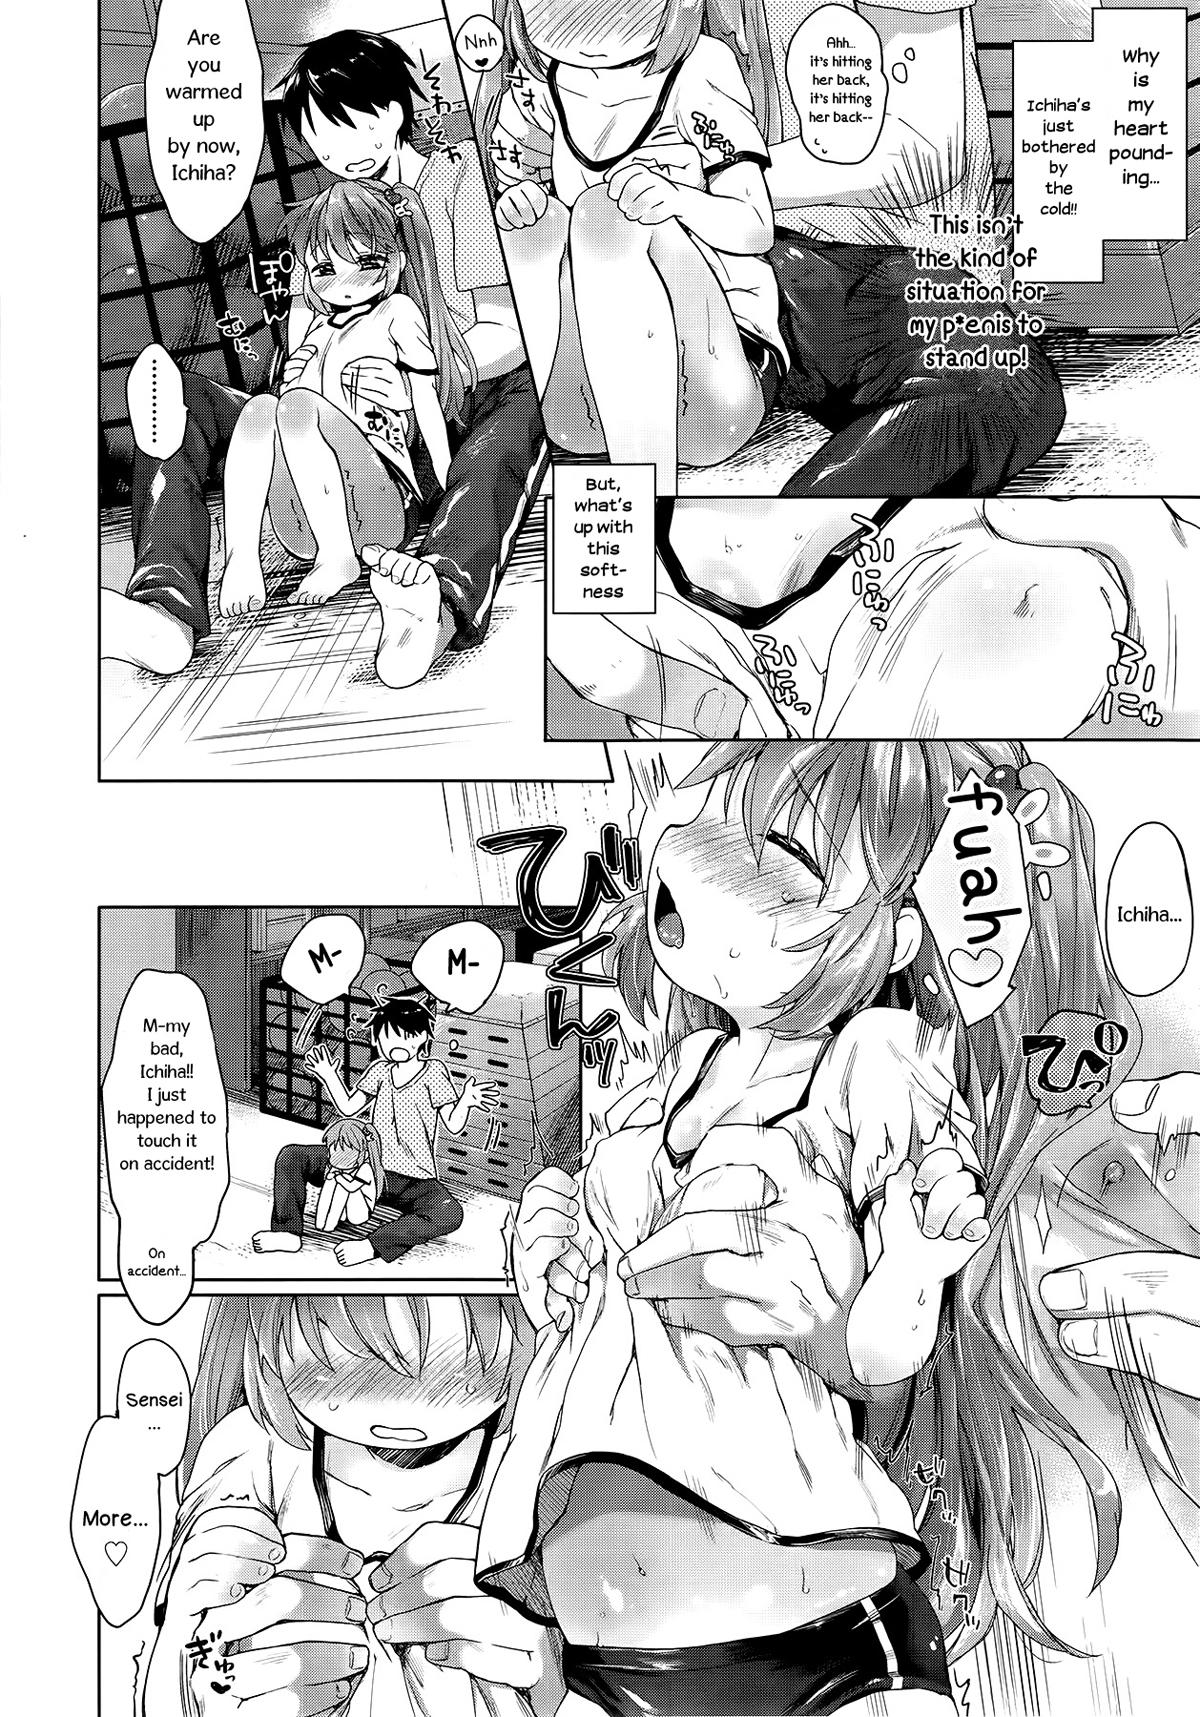 Best Blowjob Yuudachi Houkago Squirting - Page 8